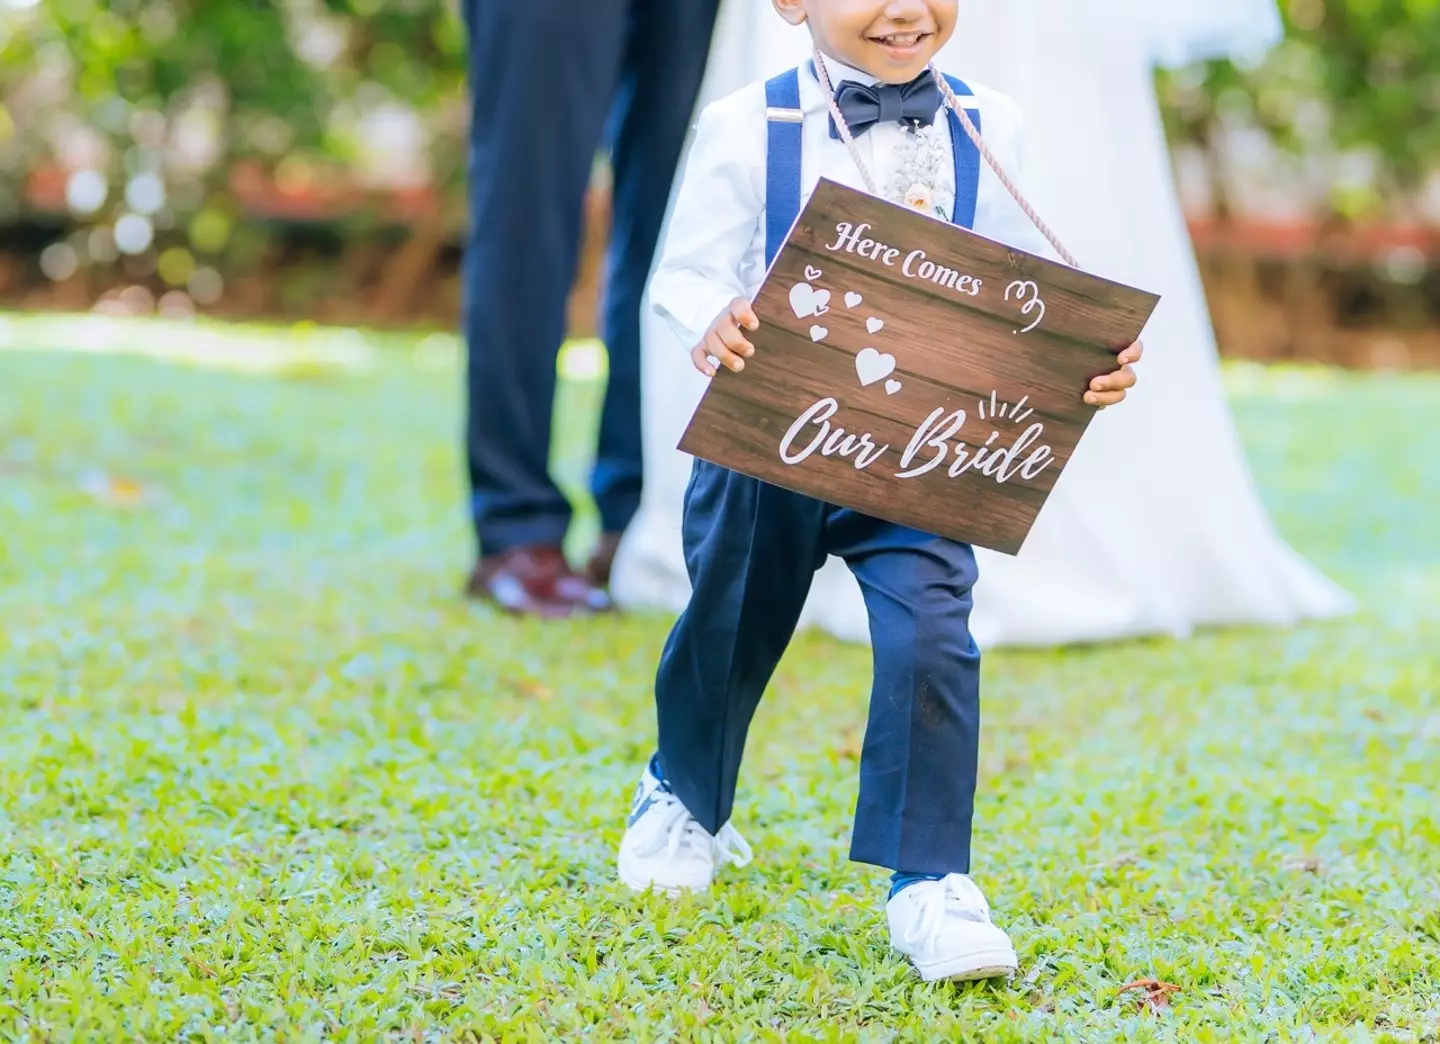 The bride threw an absolute 'tantrum' after one of the 'nephews was wearing white jeans and a white bow tie'.